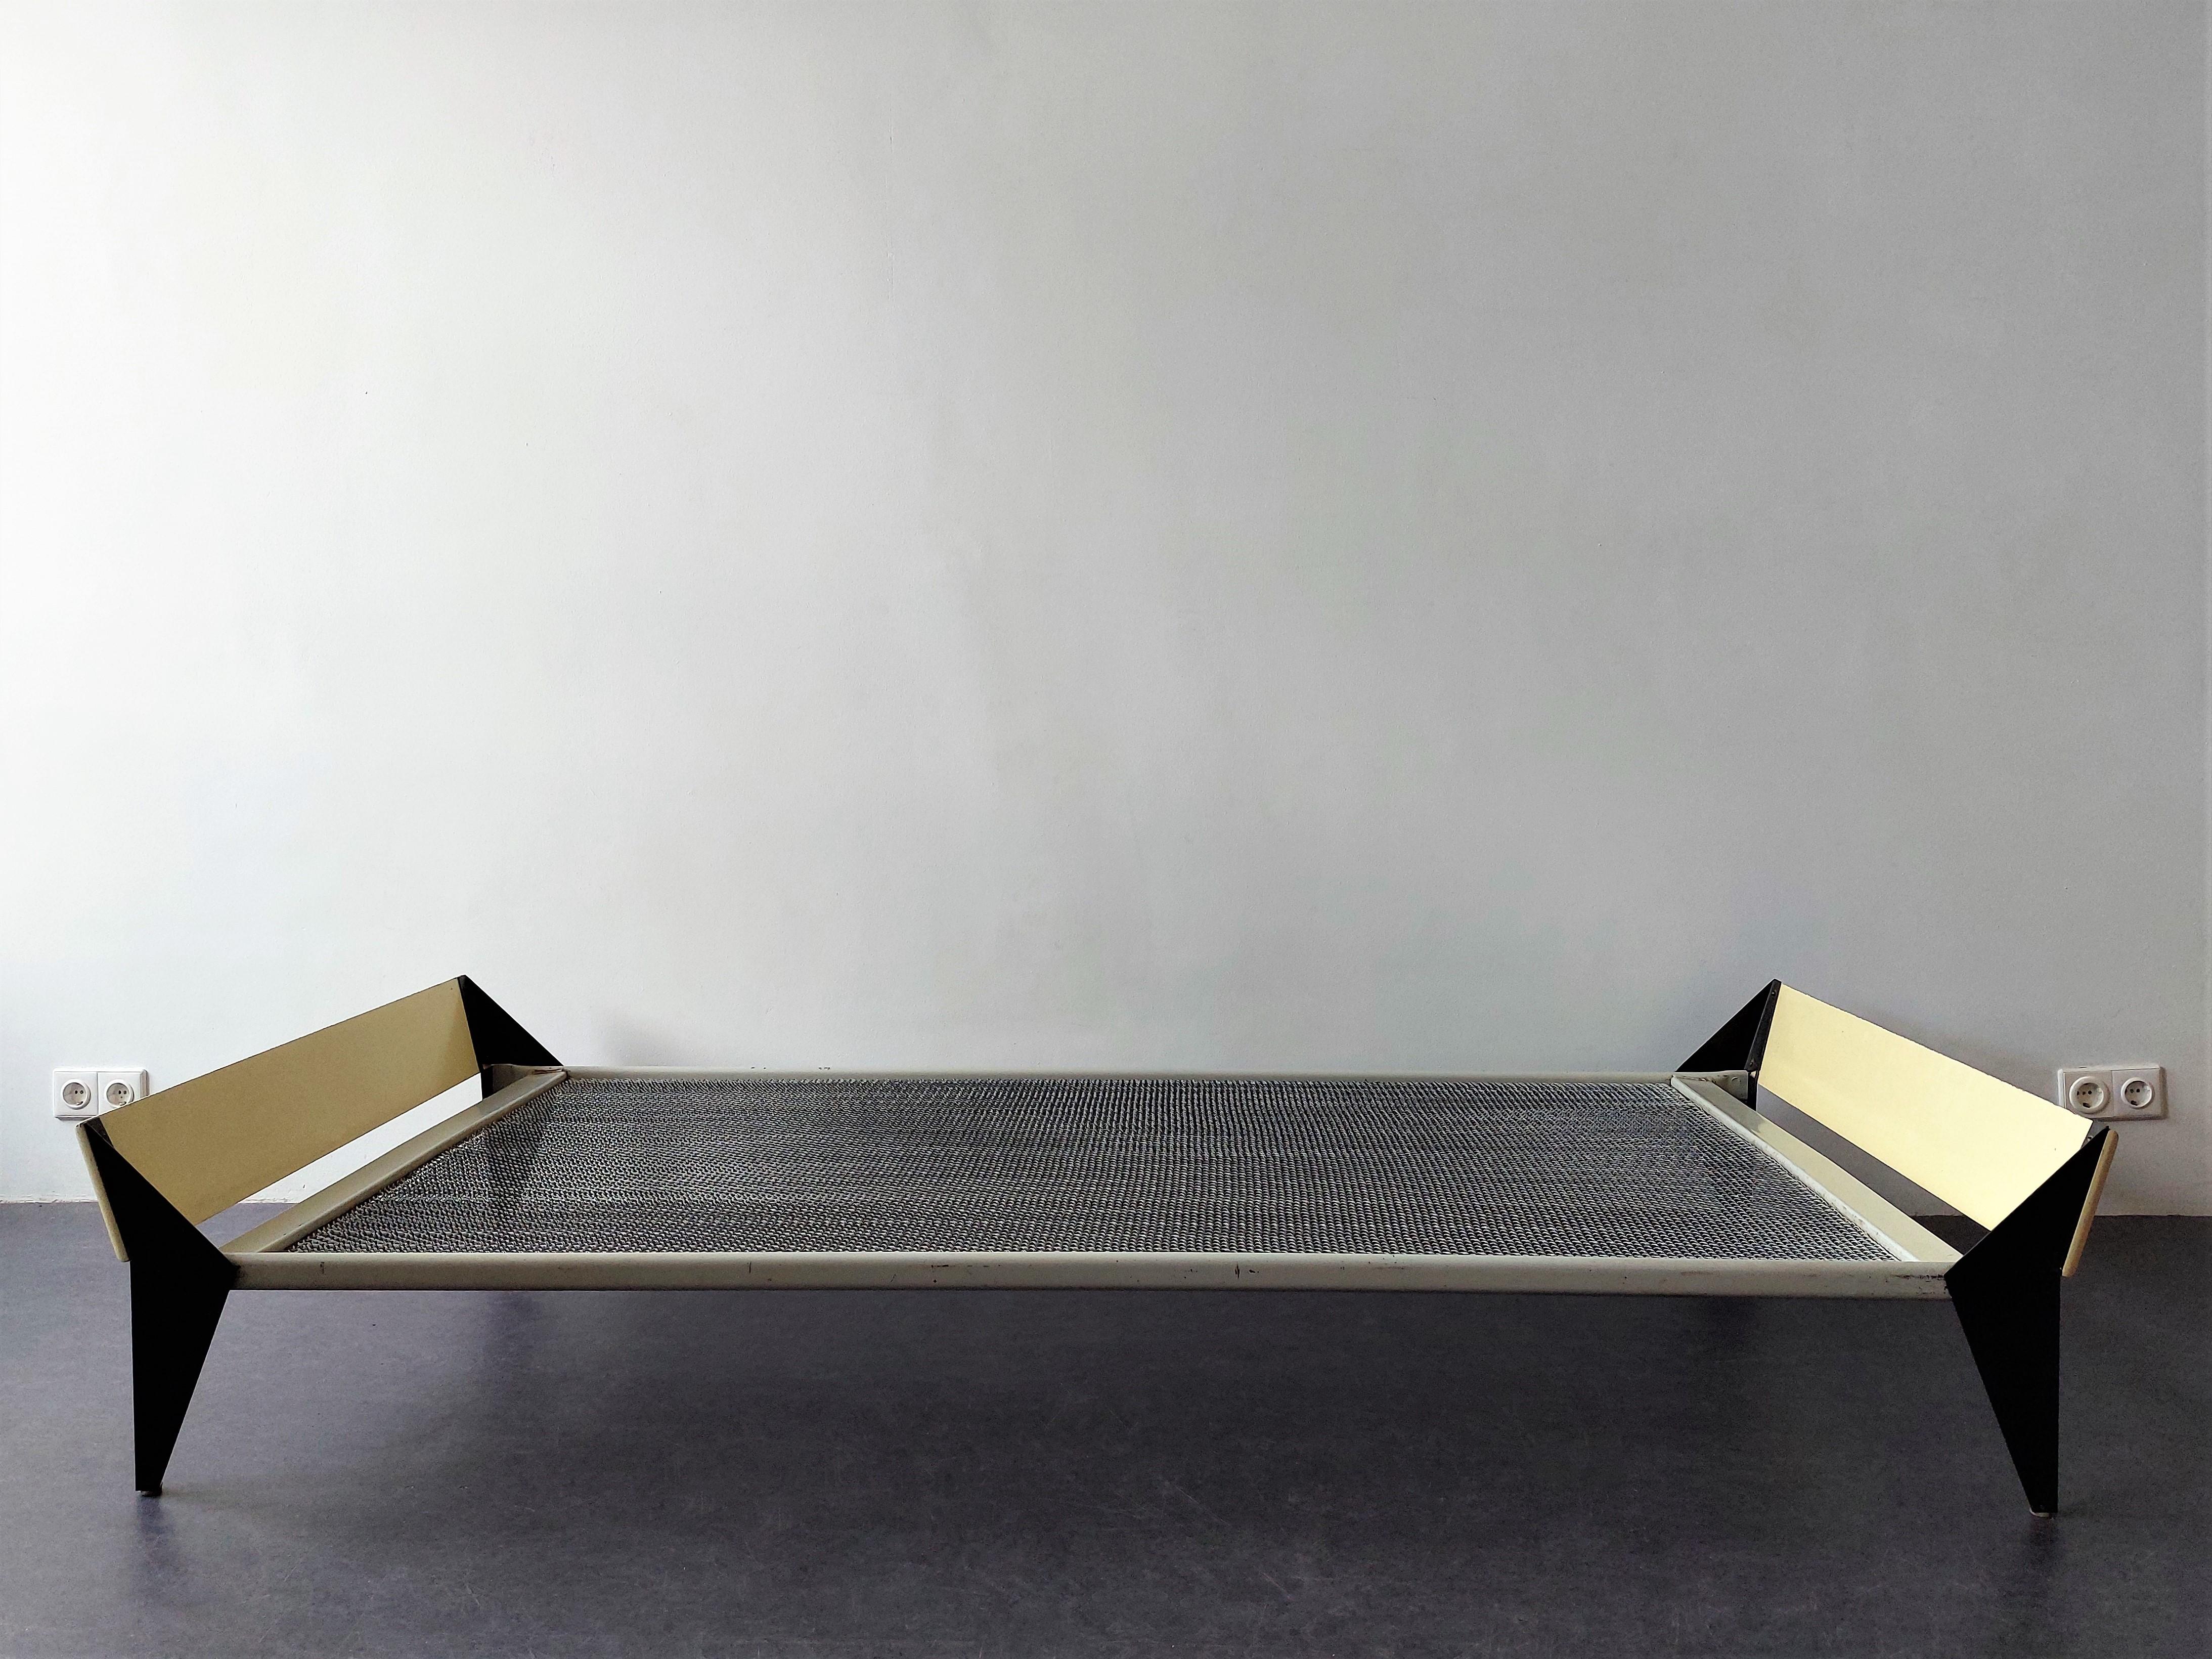 This daybed is very likely to be designed by Rob Parry and Emile Truijen for the former and renowned Dutch bed manufacturer DICO in the 1950's. The bed spring is held by 2 parts with black lacquered metal legs and a pastel yellow lacquered wooden